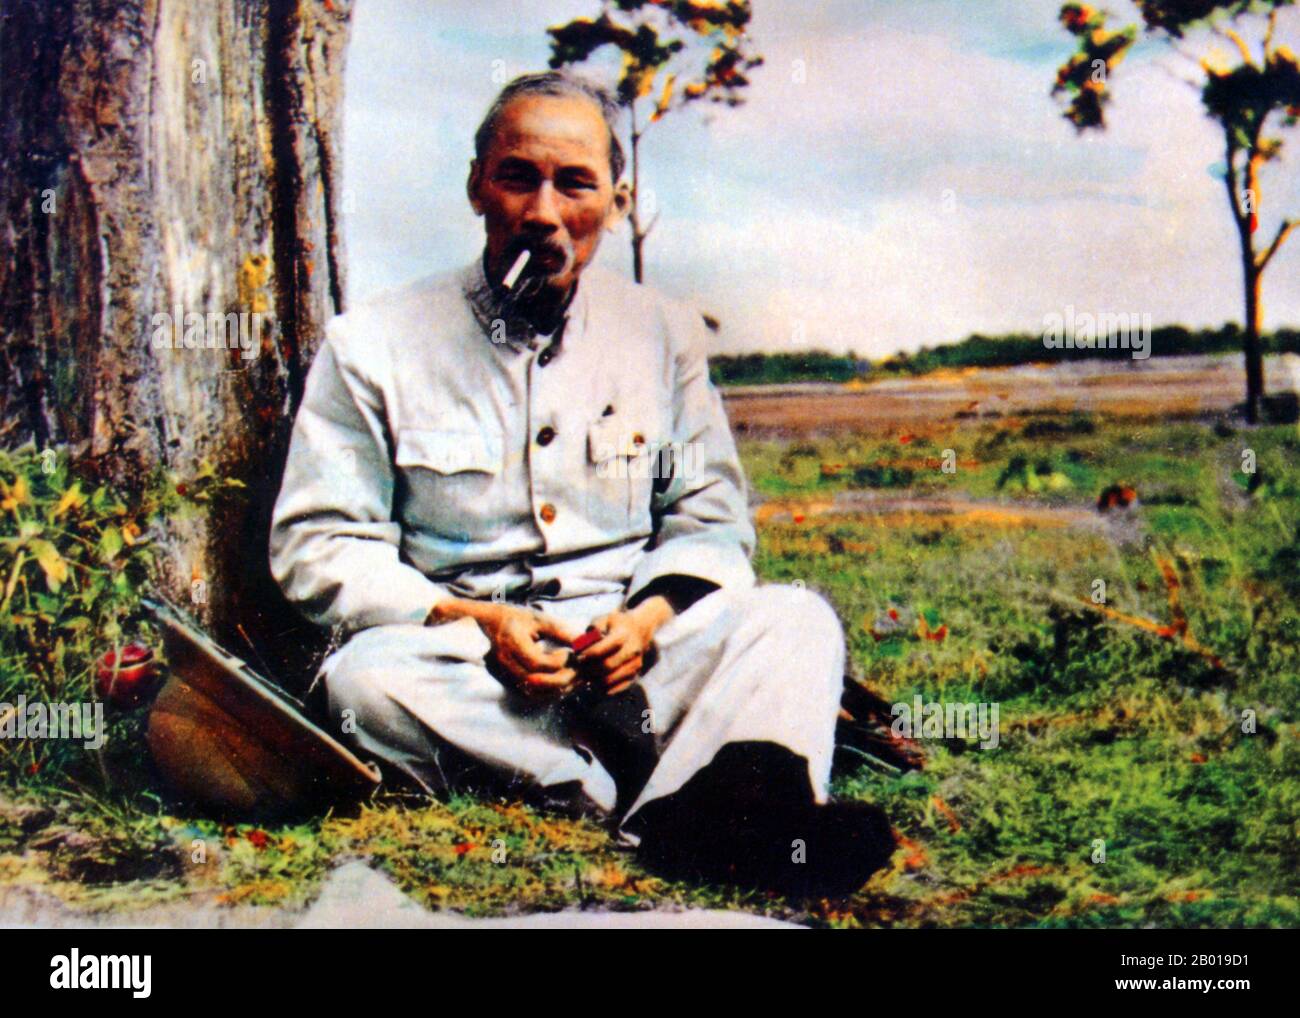 Vietnam: President Ho Chi Minh (19 May 1890 - 3 September 1969), c. 1950s.  Hồ Chí Minh, born Nguyễn Sinh Cung and also known as Nguyễn Ái Quốc was a Vietnamese Communist revolutionary leader who was prime minister (1946-1955) and president (1945-1969) of the Democratic Republic of Vietnam (North Vietnam). He formed the Democratic Republic of Vietnam and led the Viet Cong during the Vietnam War until his death. Stock Photo